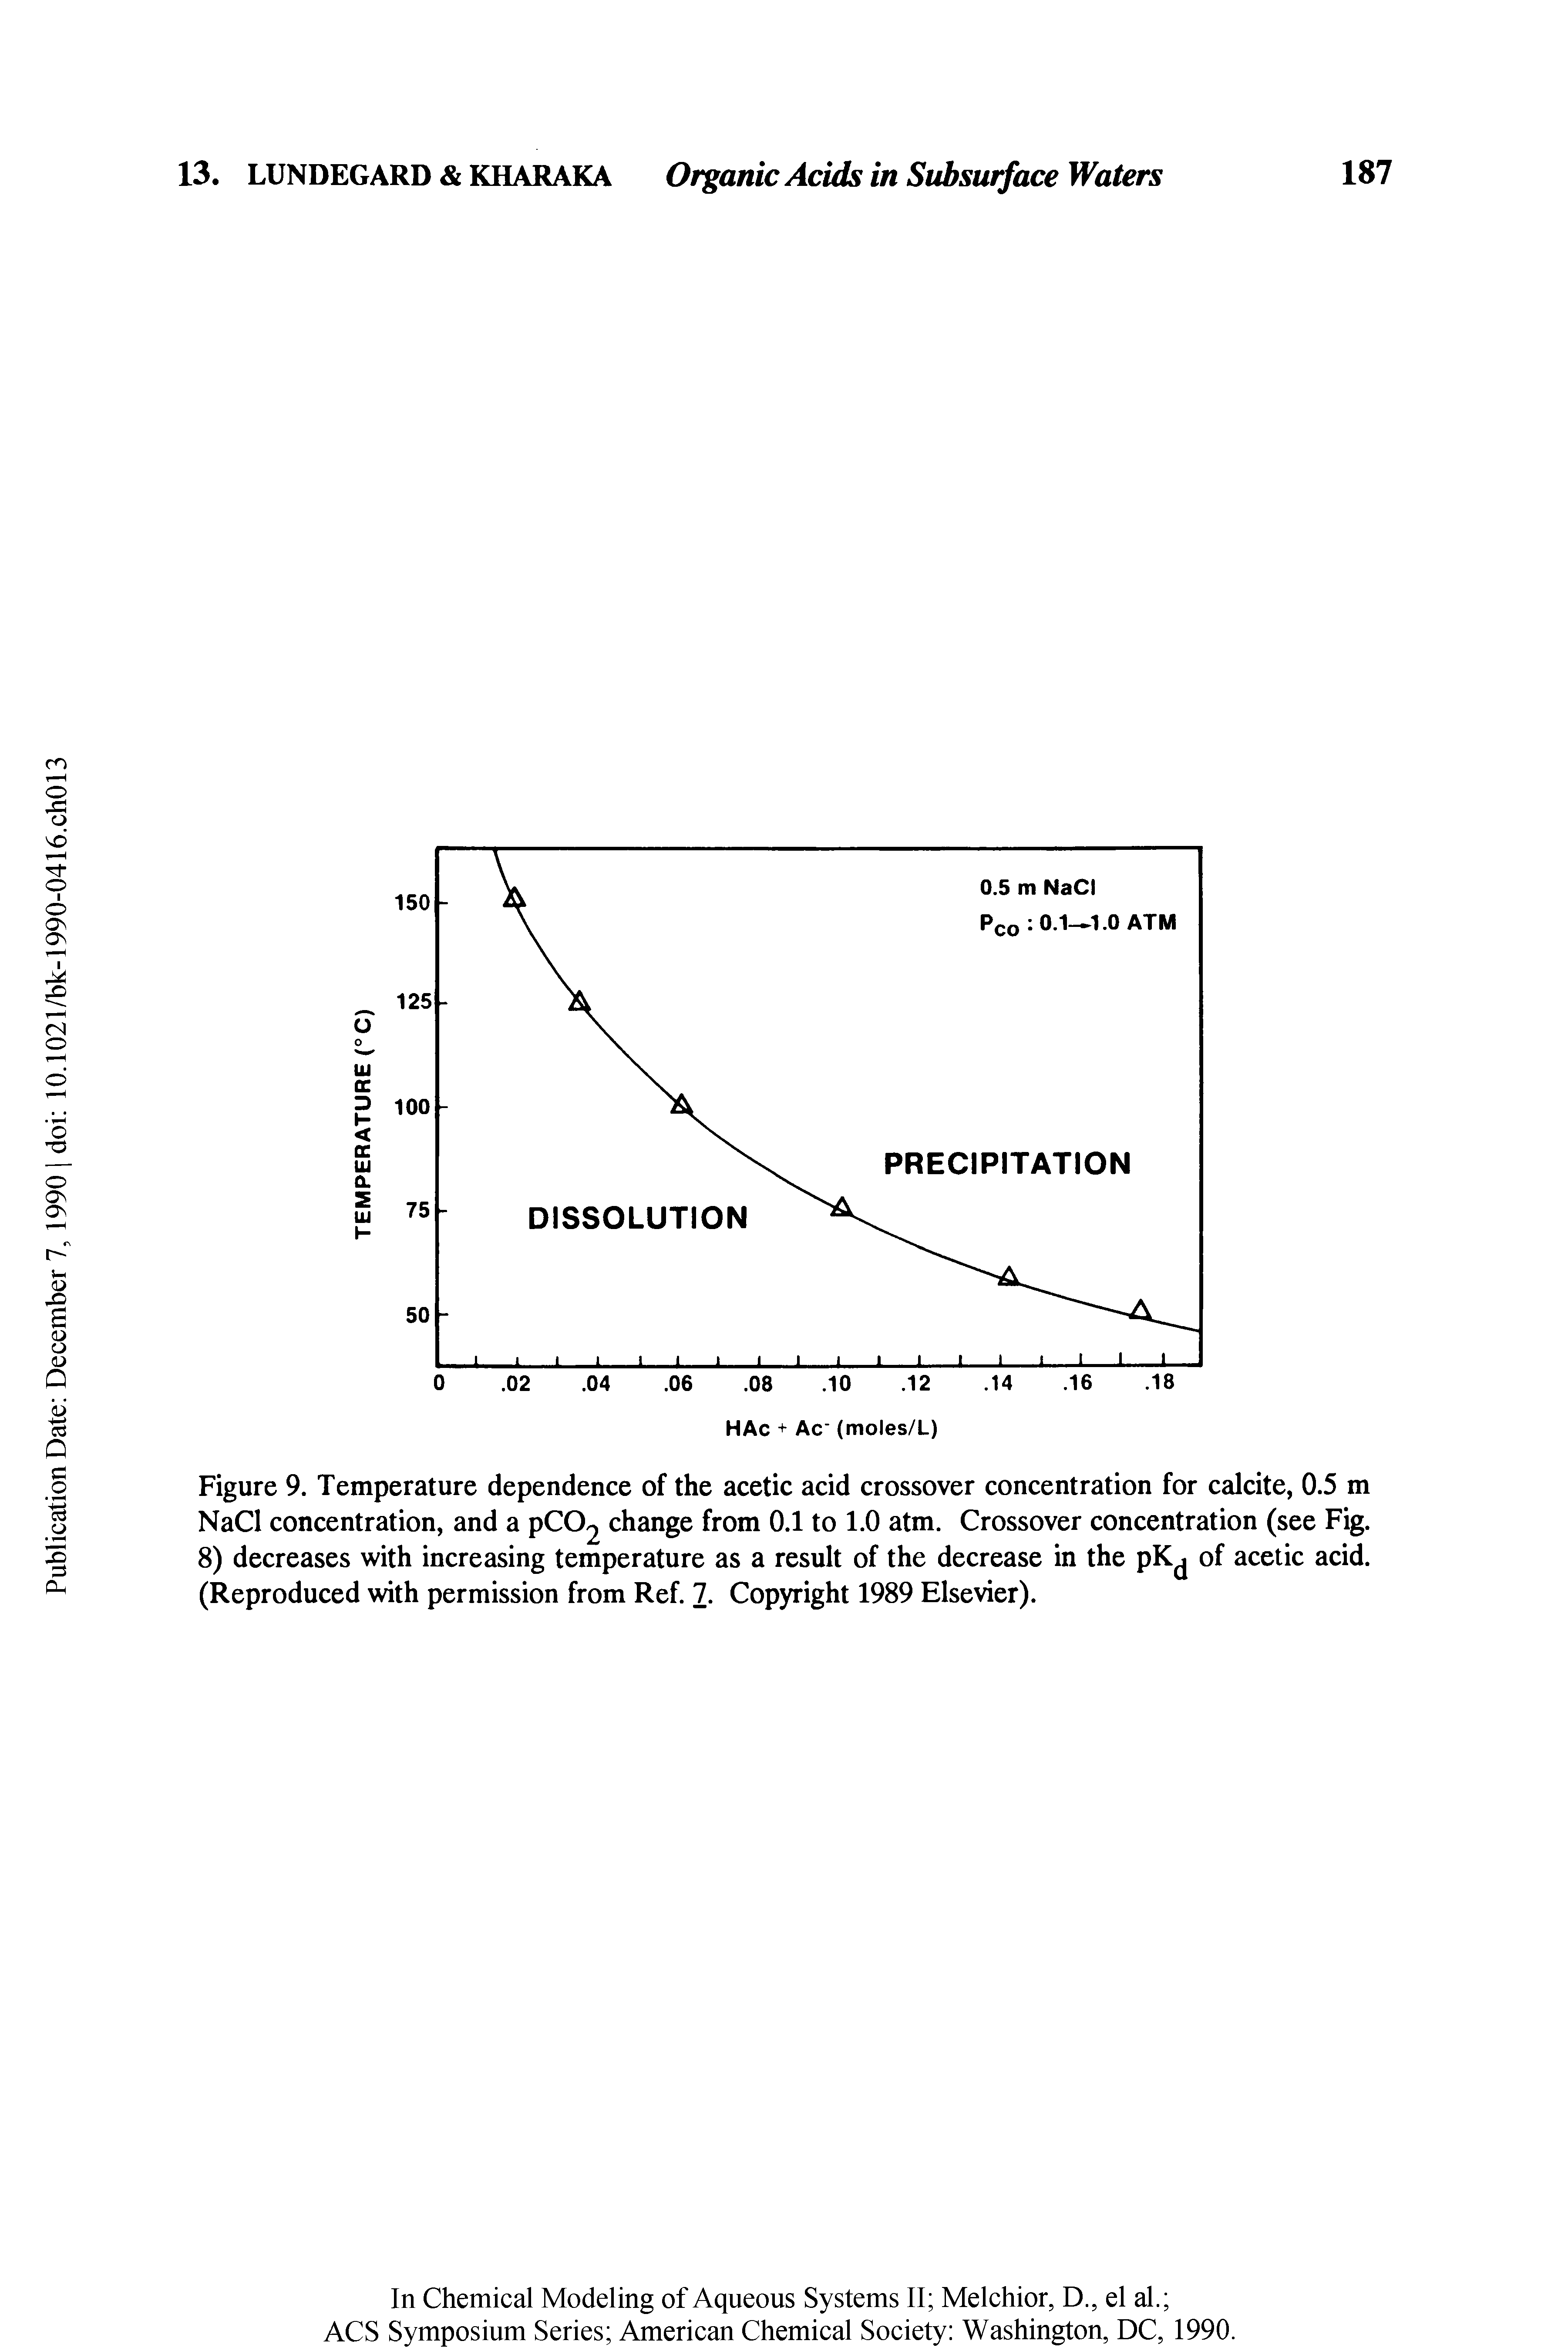 Figure 9. Temperature dependence of the acetic acid crossover concentration for calcite, 0.5 m NaCl concentration, and a pC02 change from 0.1 to 1.0 atm. Crossover concentration (see Fig. 8) decreases with increasing temperature as a result of the decrease in the pK of acetic acid. (Reproduced with permission from Ref. 7. Copyright 1989 Elsevier).